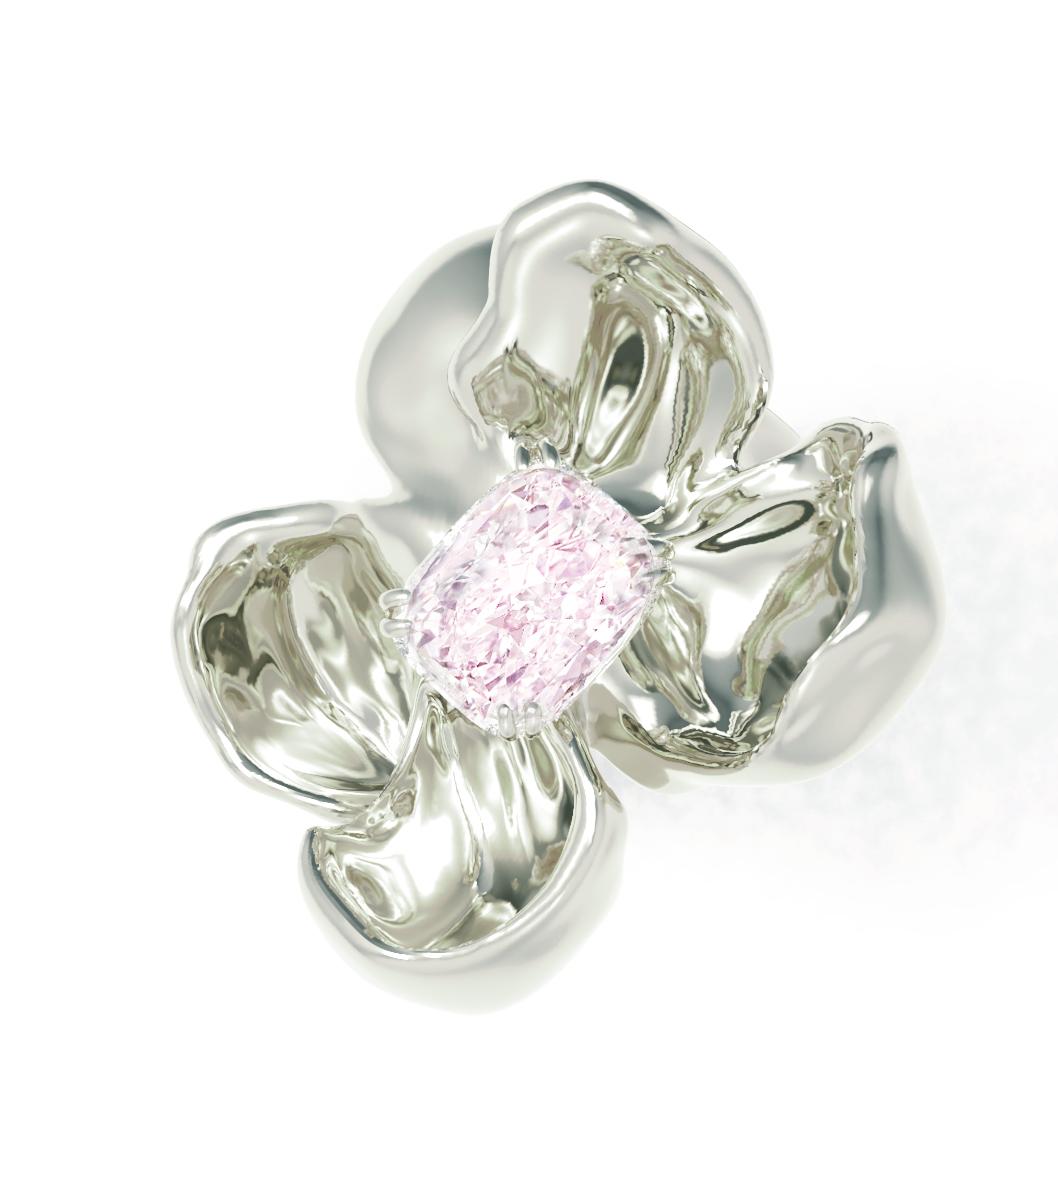 This Magnolia Flower Sculptural pendant necklace is crafted in 18 karat white gold and features a large certified fancy light purplish pink diamond of excellent quality. The crushed ice cushion shape is the artist's favorite for displaying the